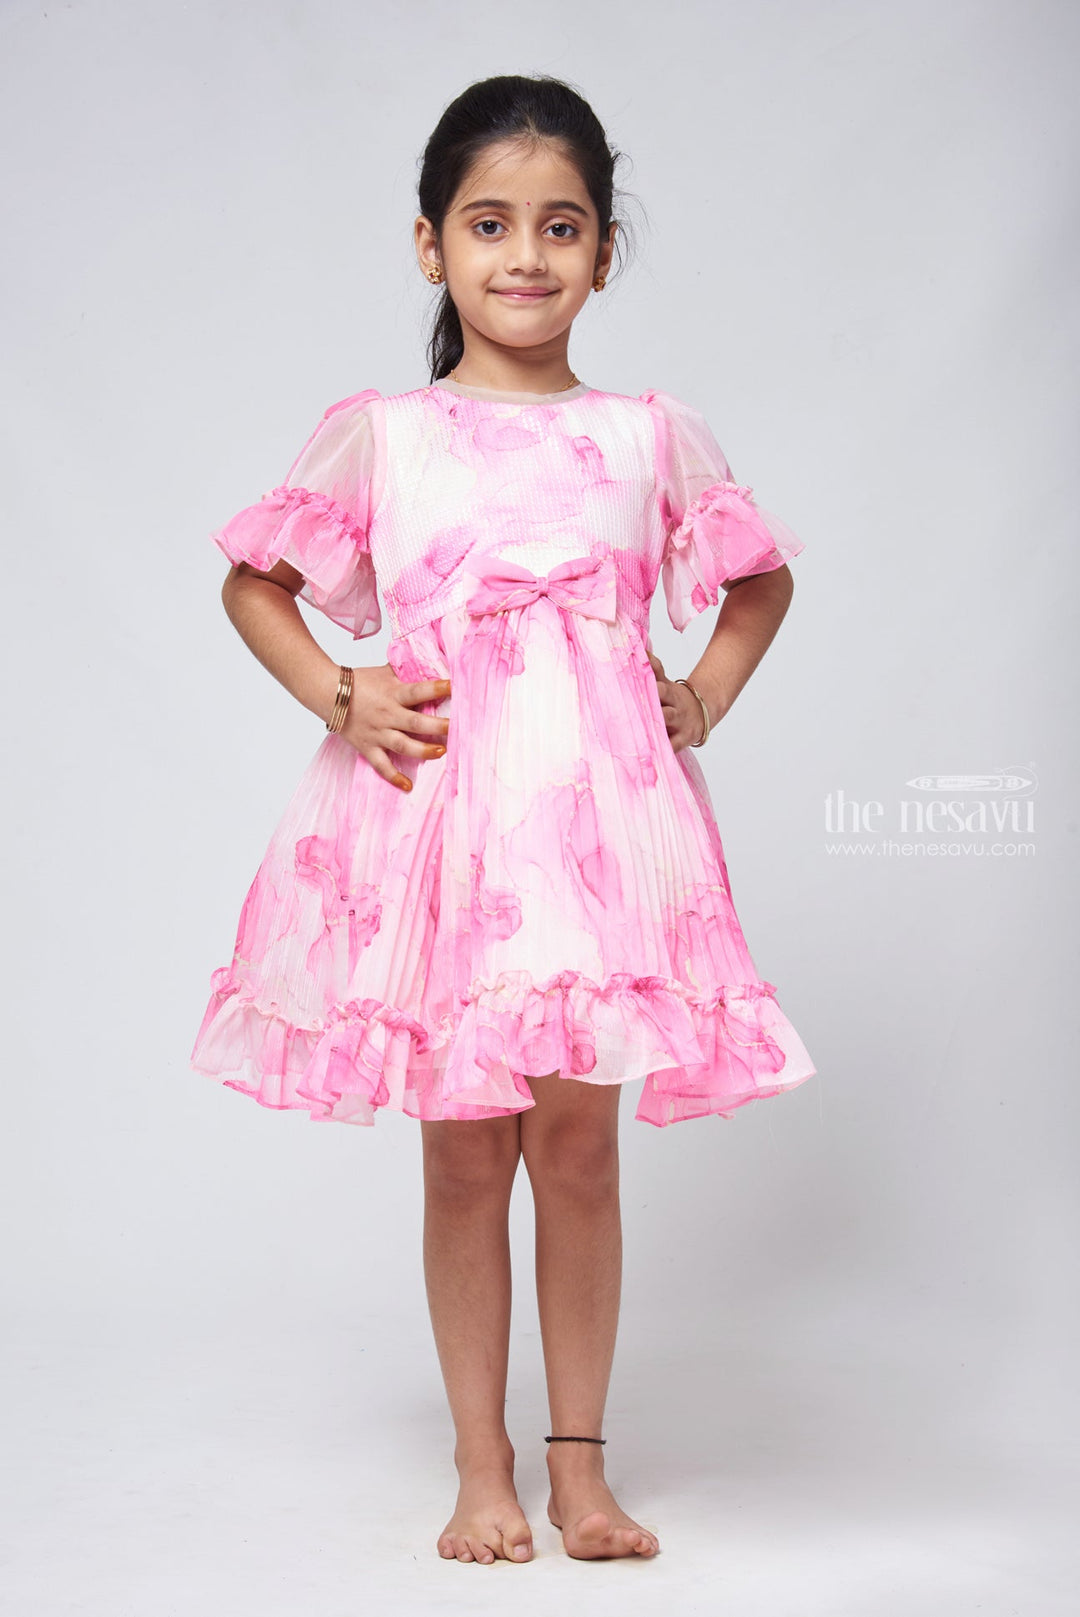 The Nesavu Girls Fancy Frock Girls Fancy Georgette Frock with Elegant Detailing and Lace Trims Nesavu 16 (1Y) / Pink / Organza GFC1120A-16 Designer Girls Party Dress - Perfect For Photoshoots | The Nesavu